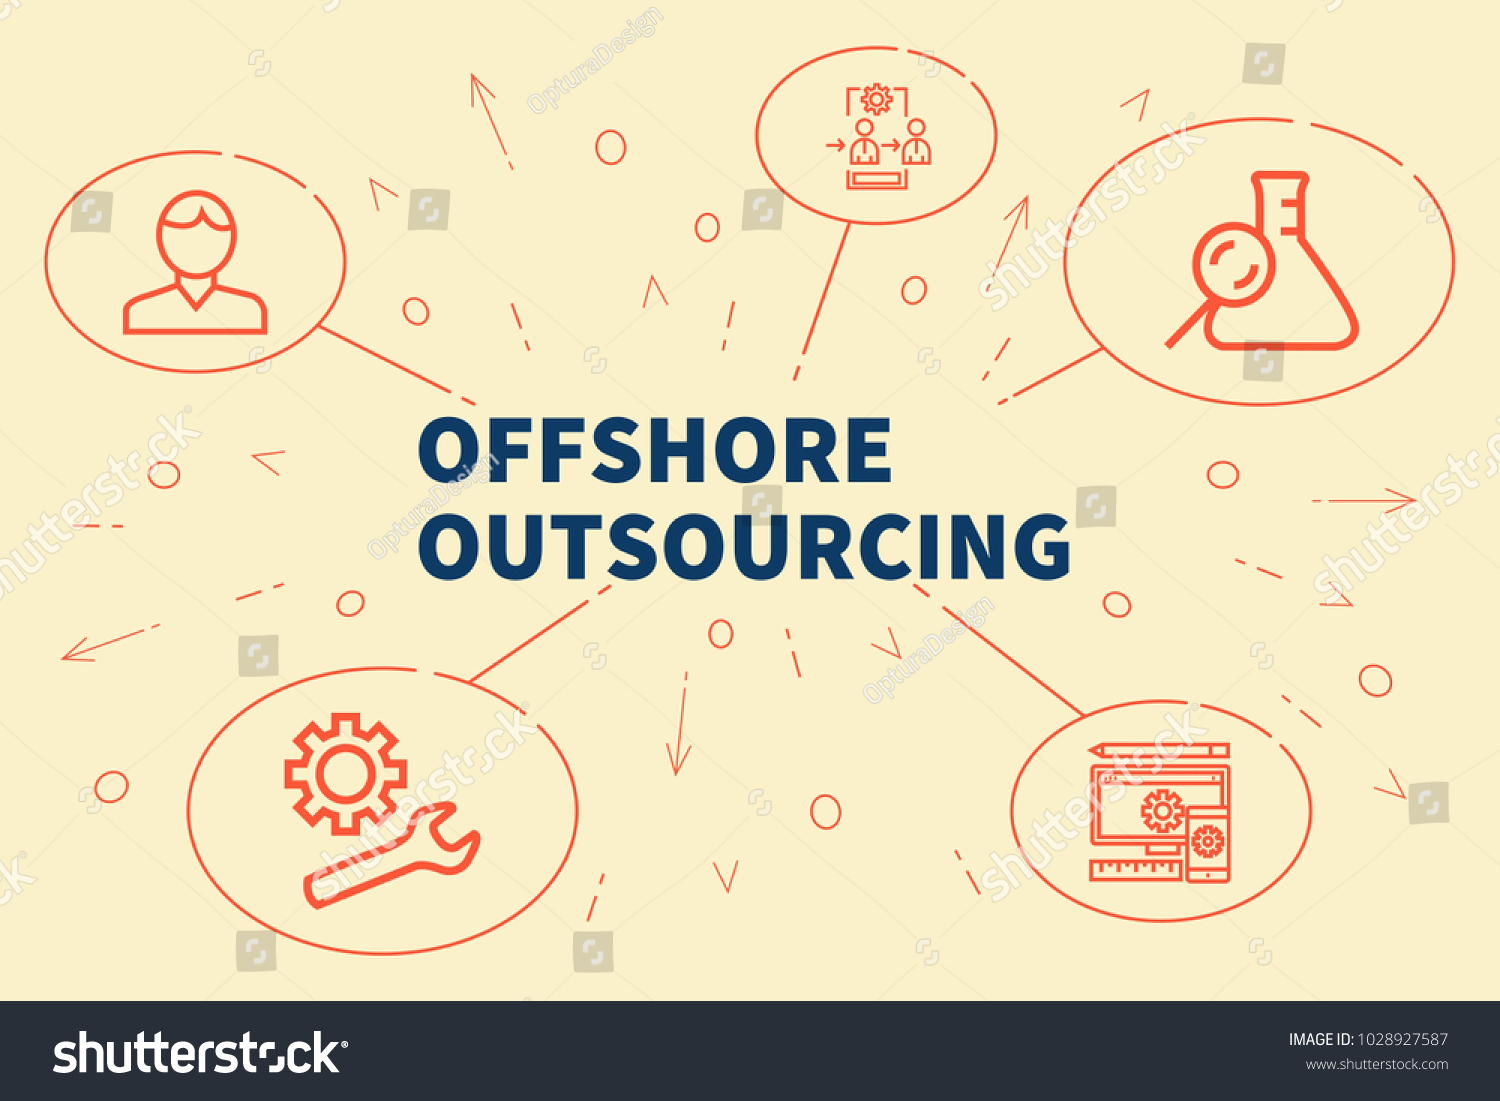 Business Illustration Showing Concept Offshore Outsourcing Stock  Illustration 1028927587